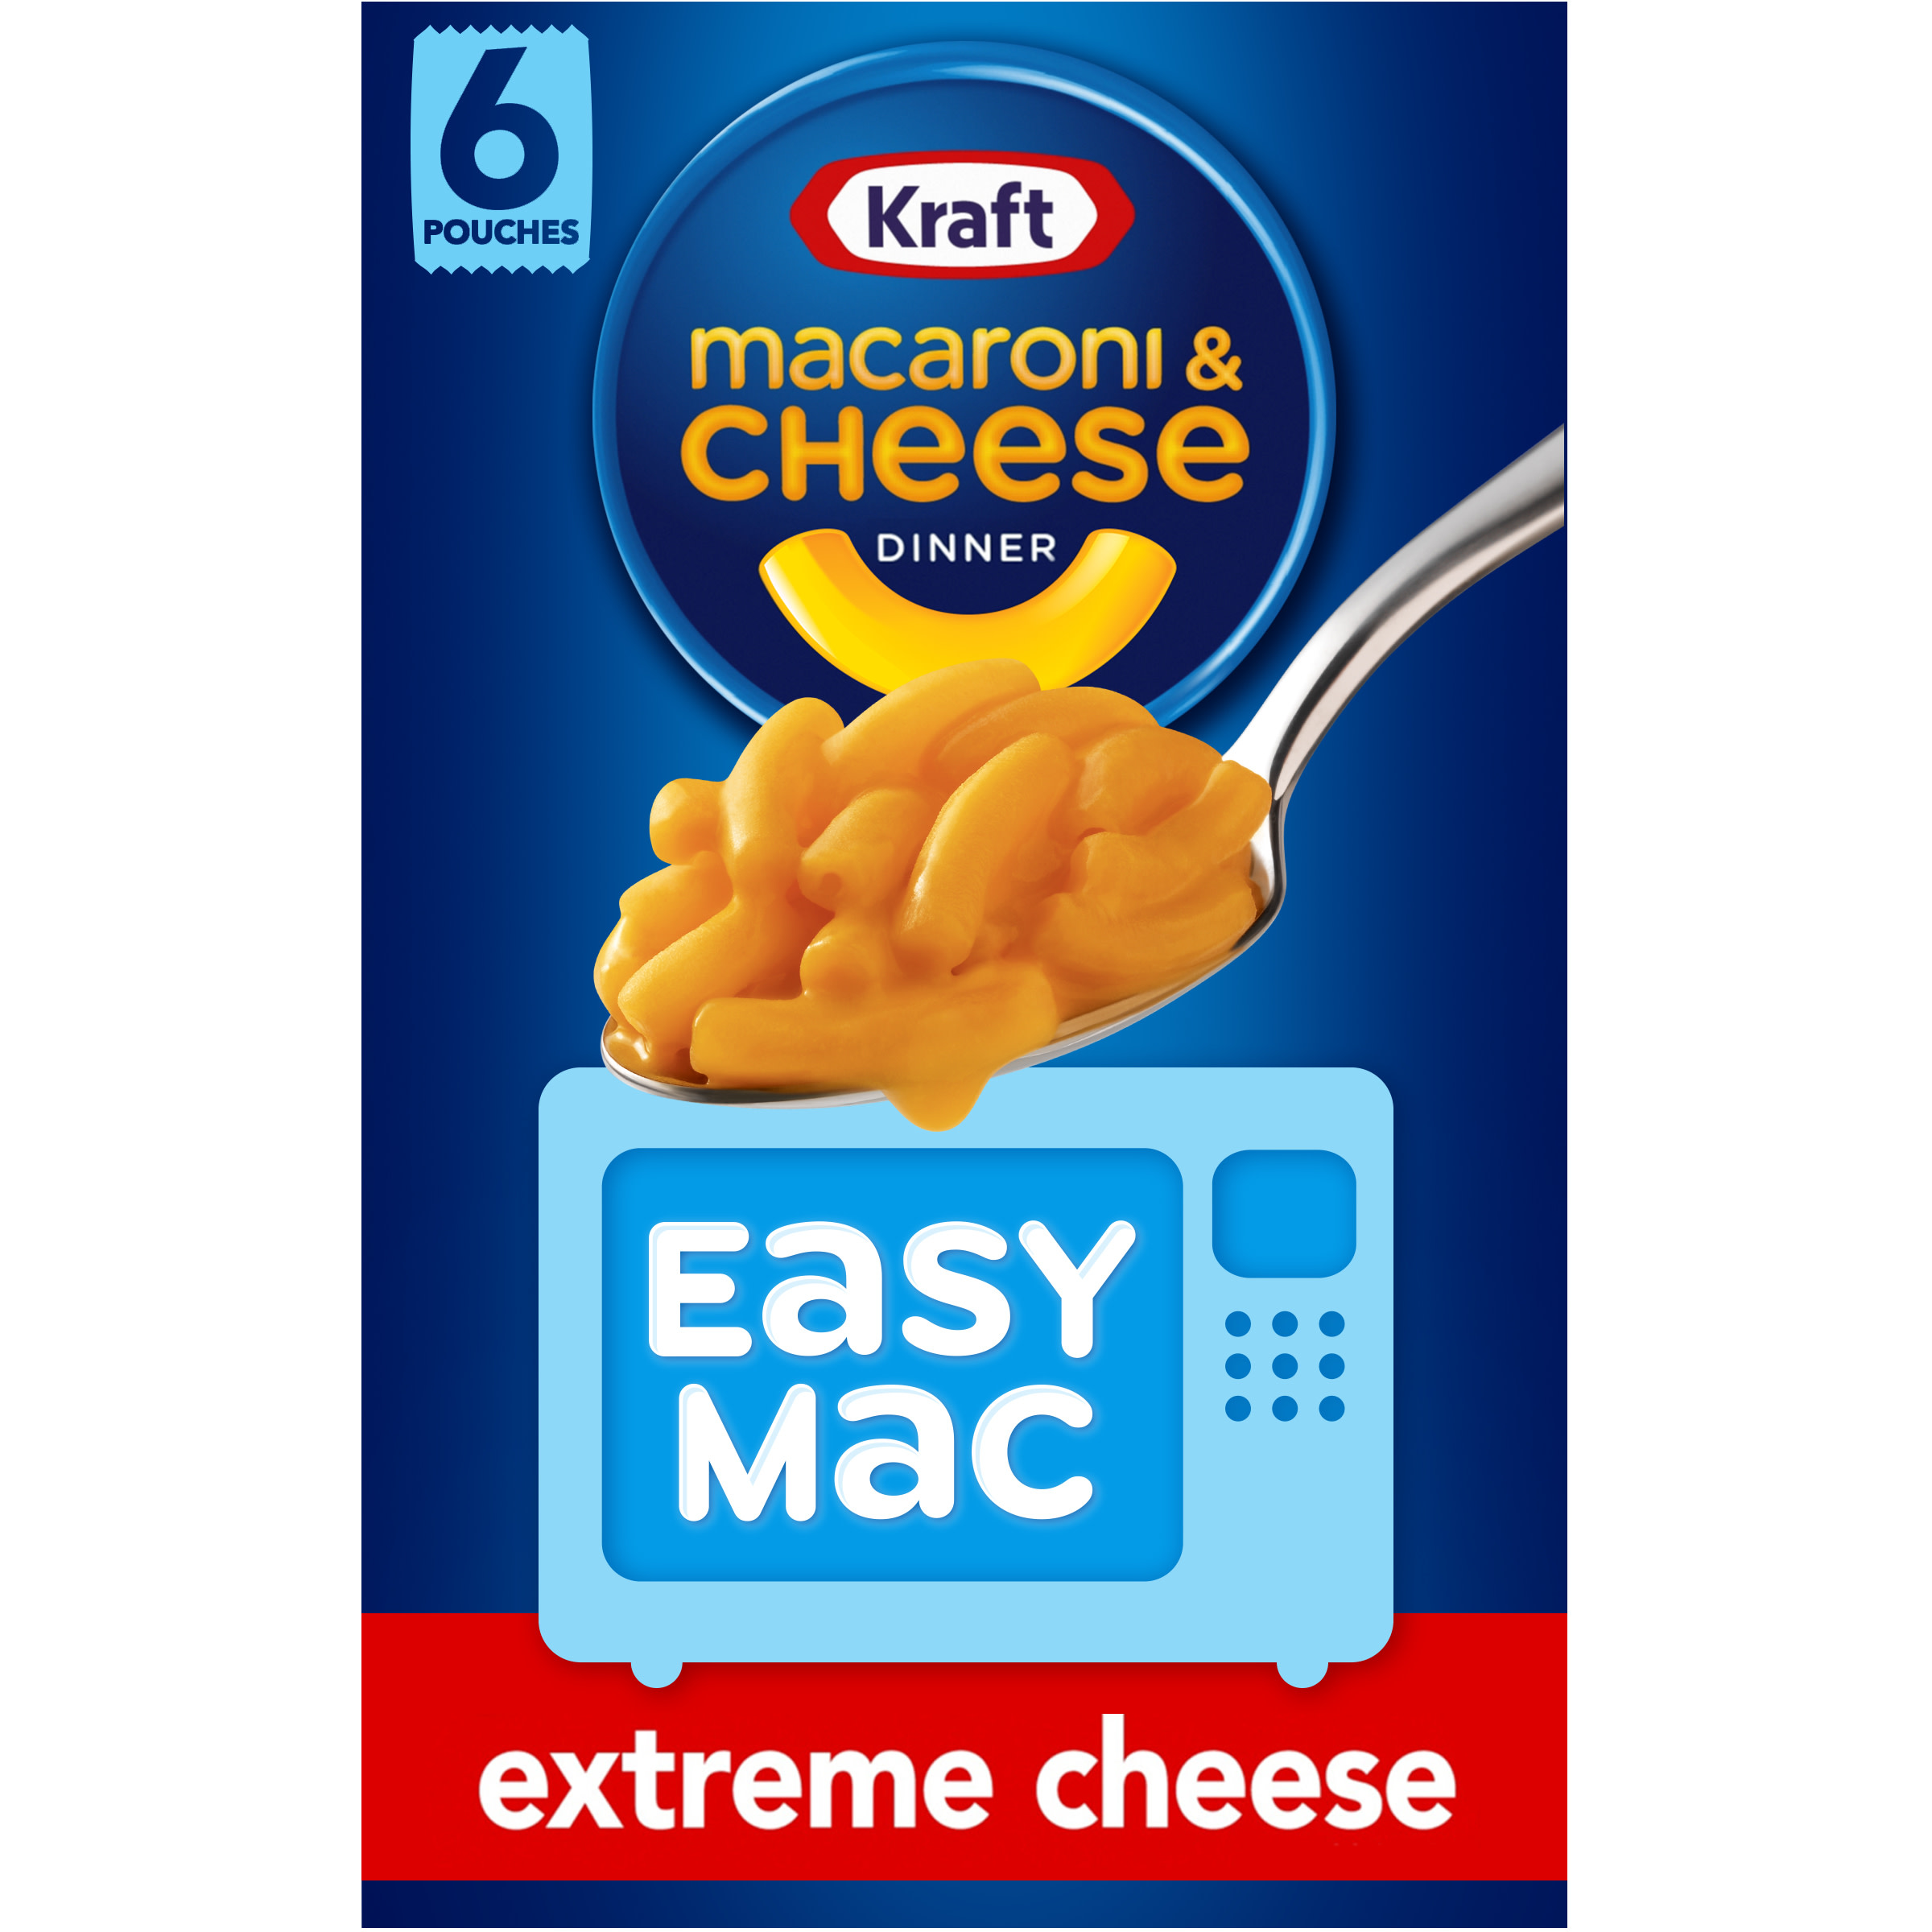 Kraft Easy Mac Extreme Cheese Mac N Cheese Macaroni and Cheese Microwavable Dinner, 6 ct Packets - image 1 of 8